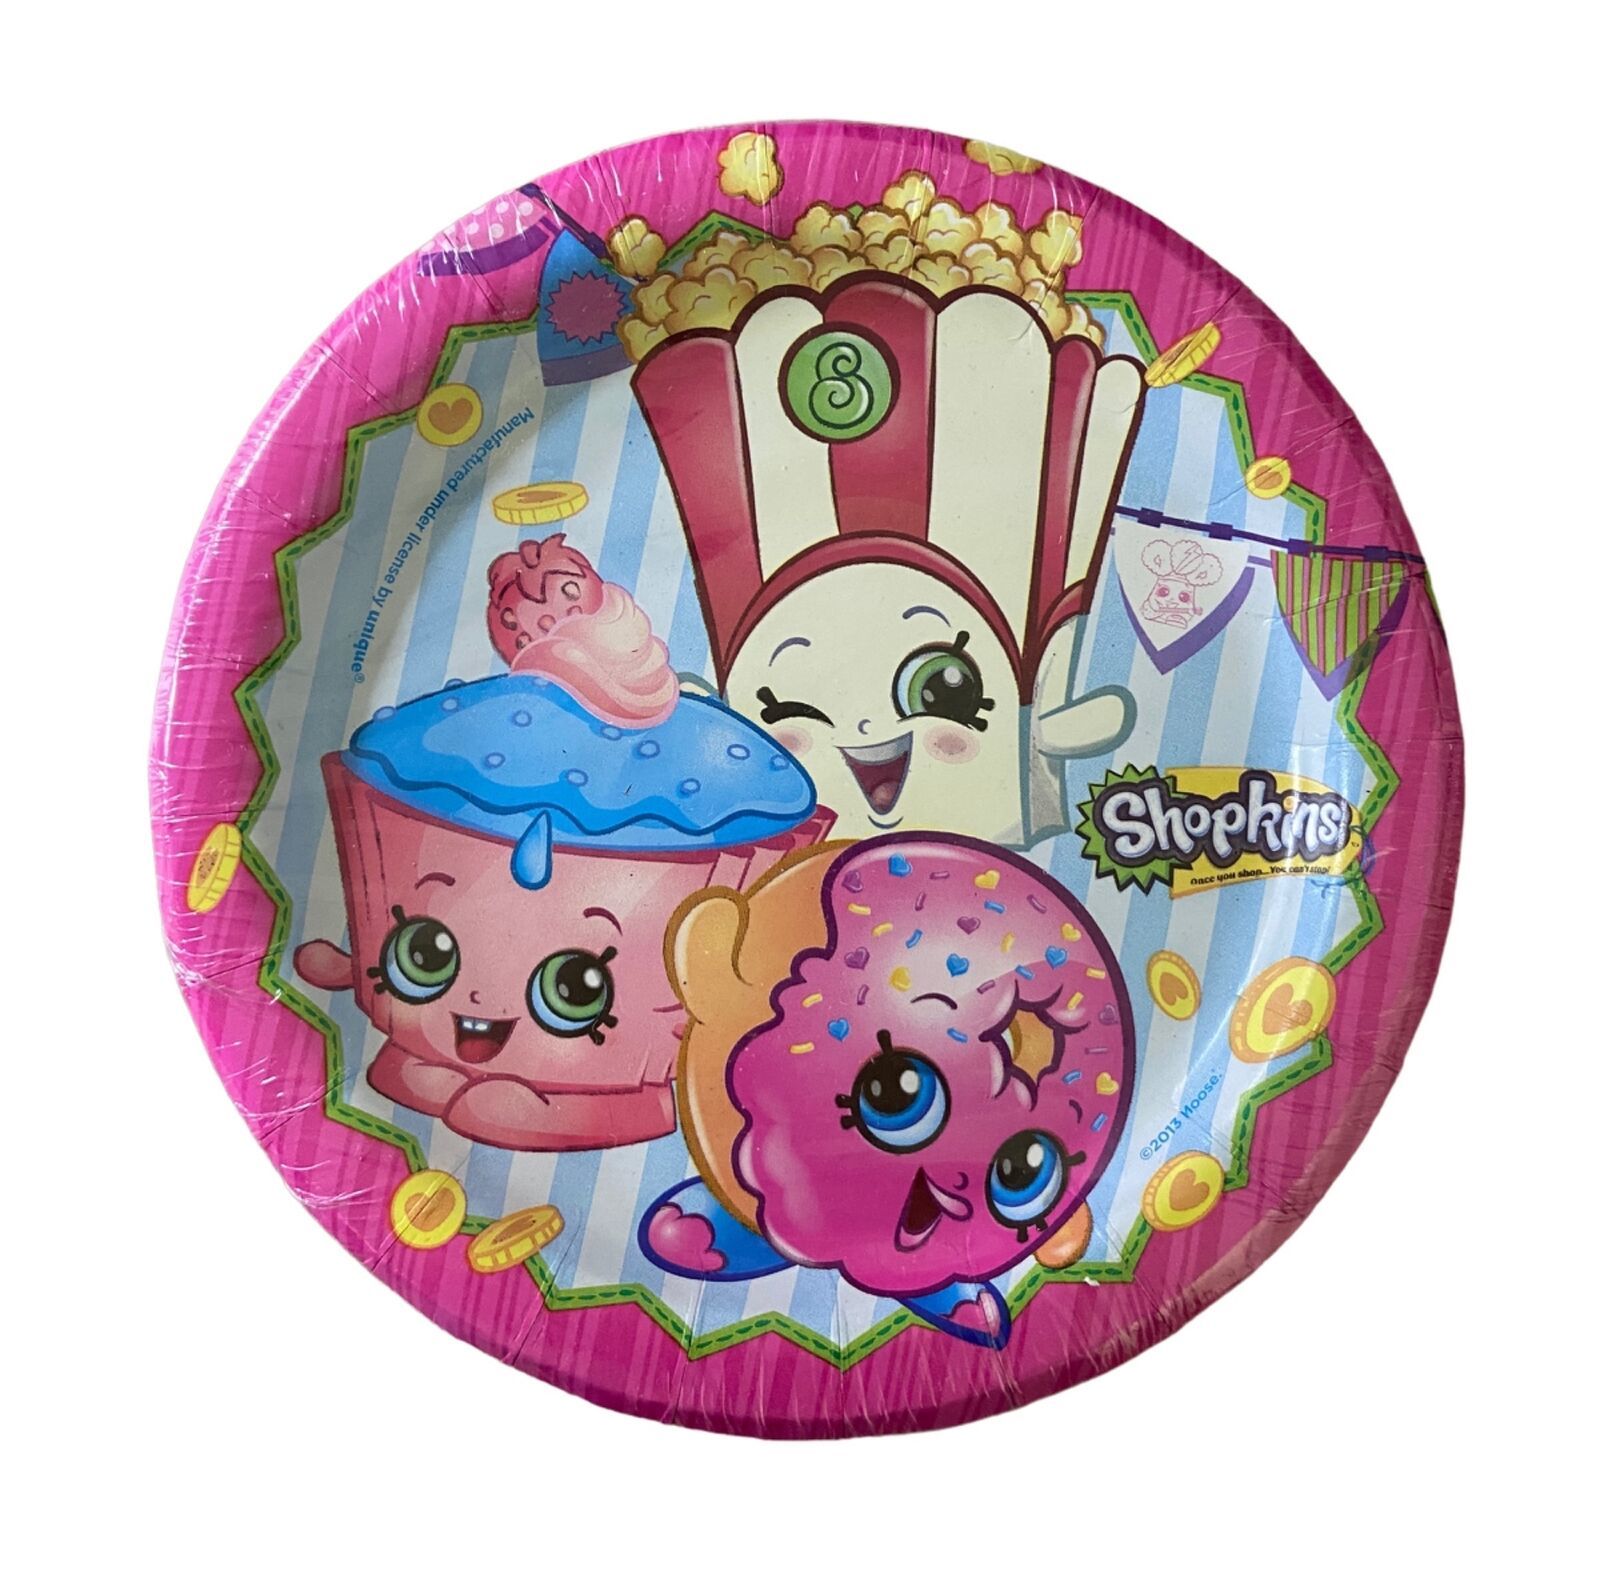 Shopkins Party Plates 7 inch 8 count  Party Supplies - $5.59